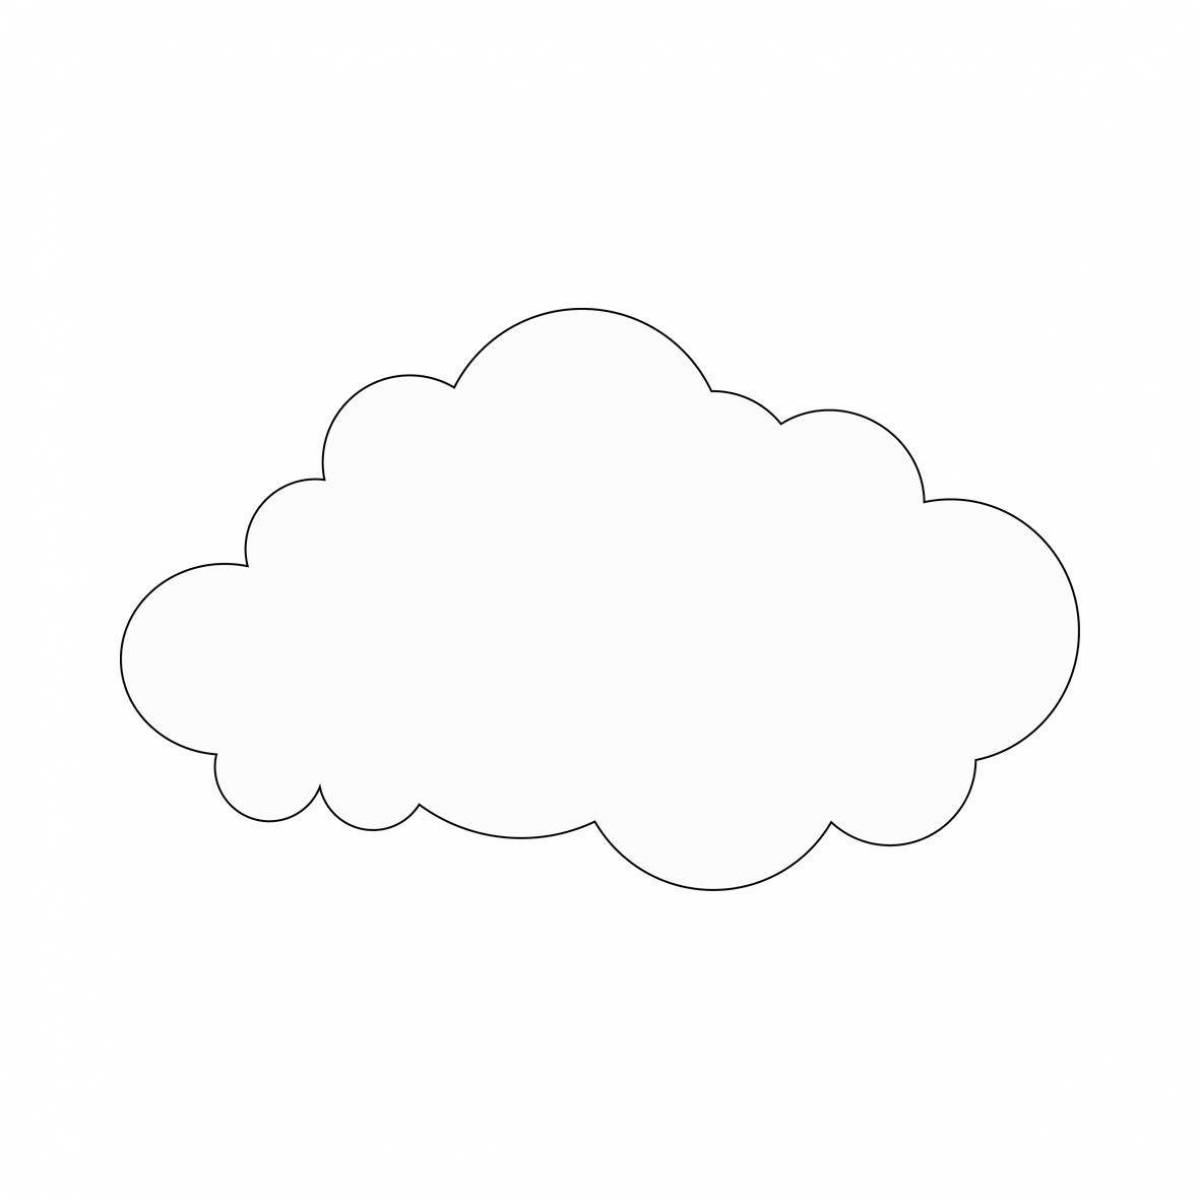 Coloring dreamy cloud for kids